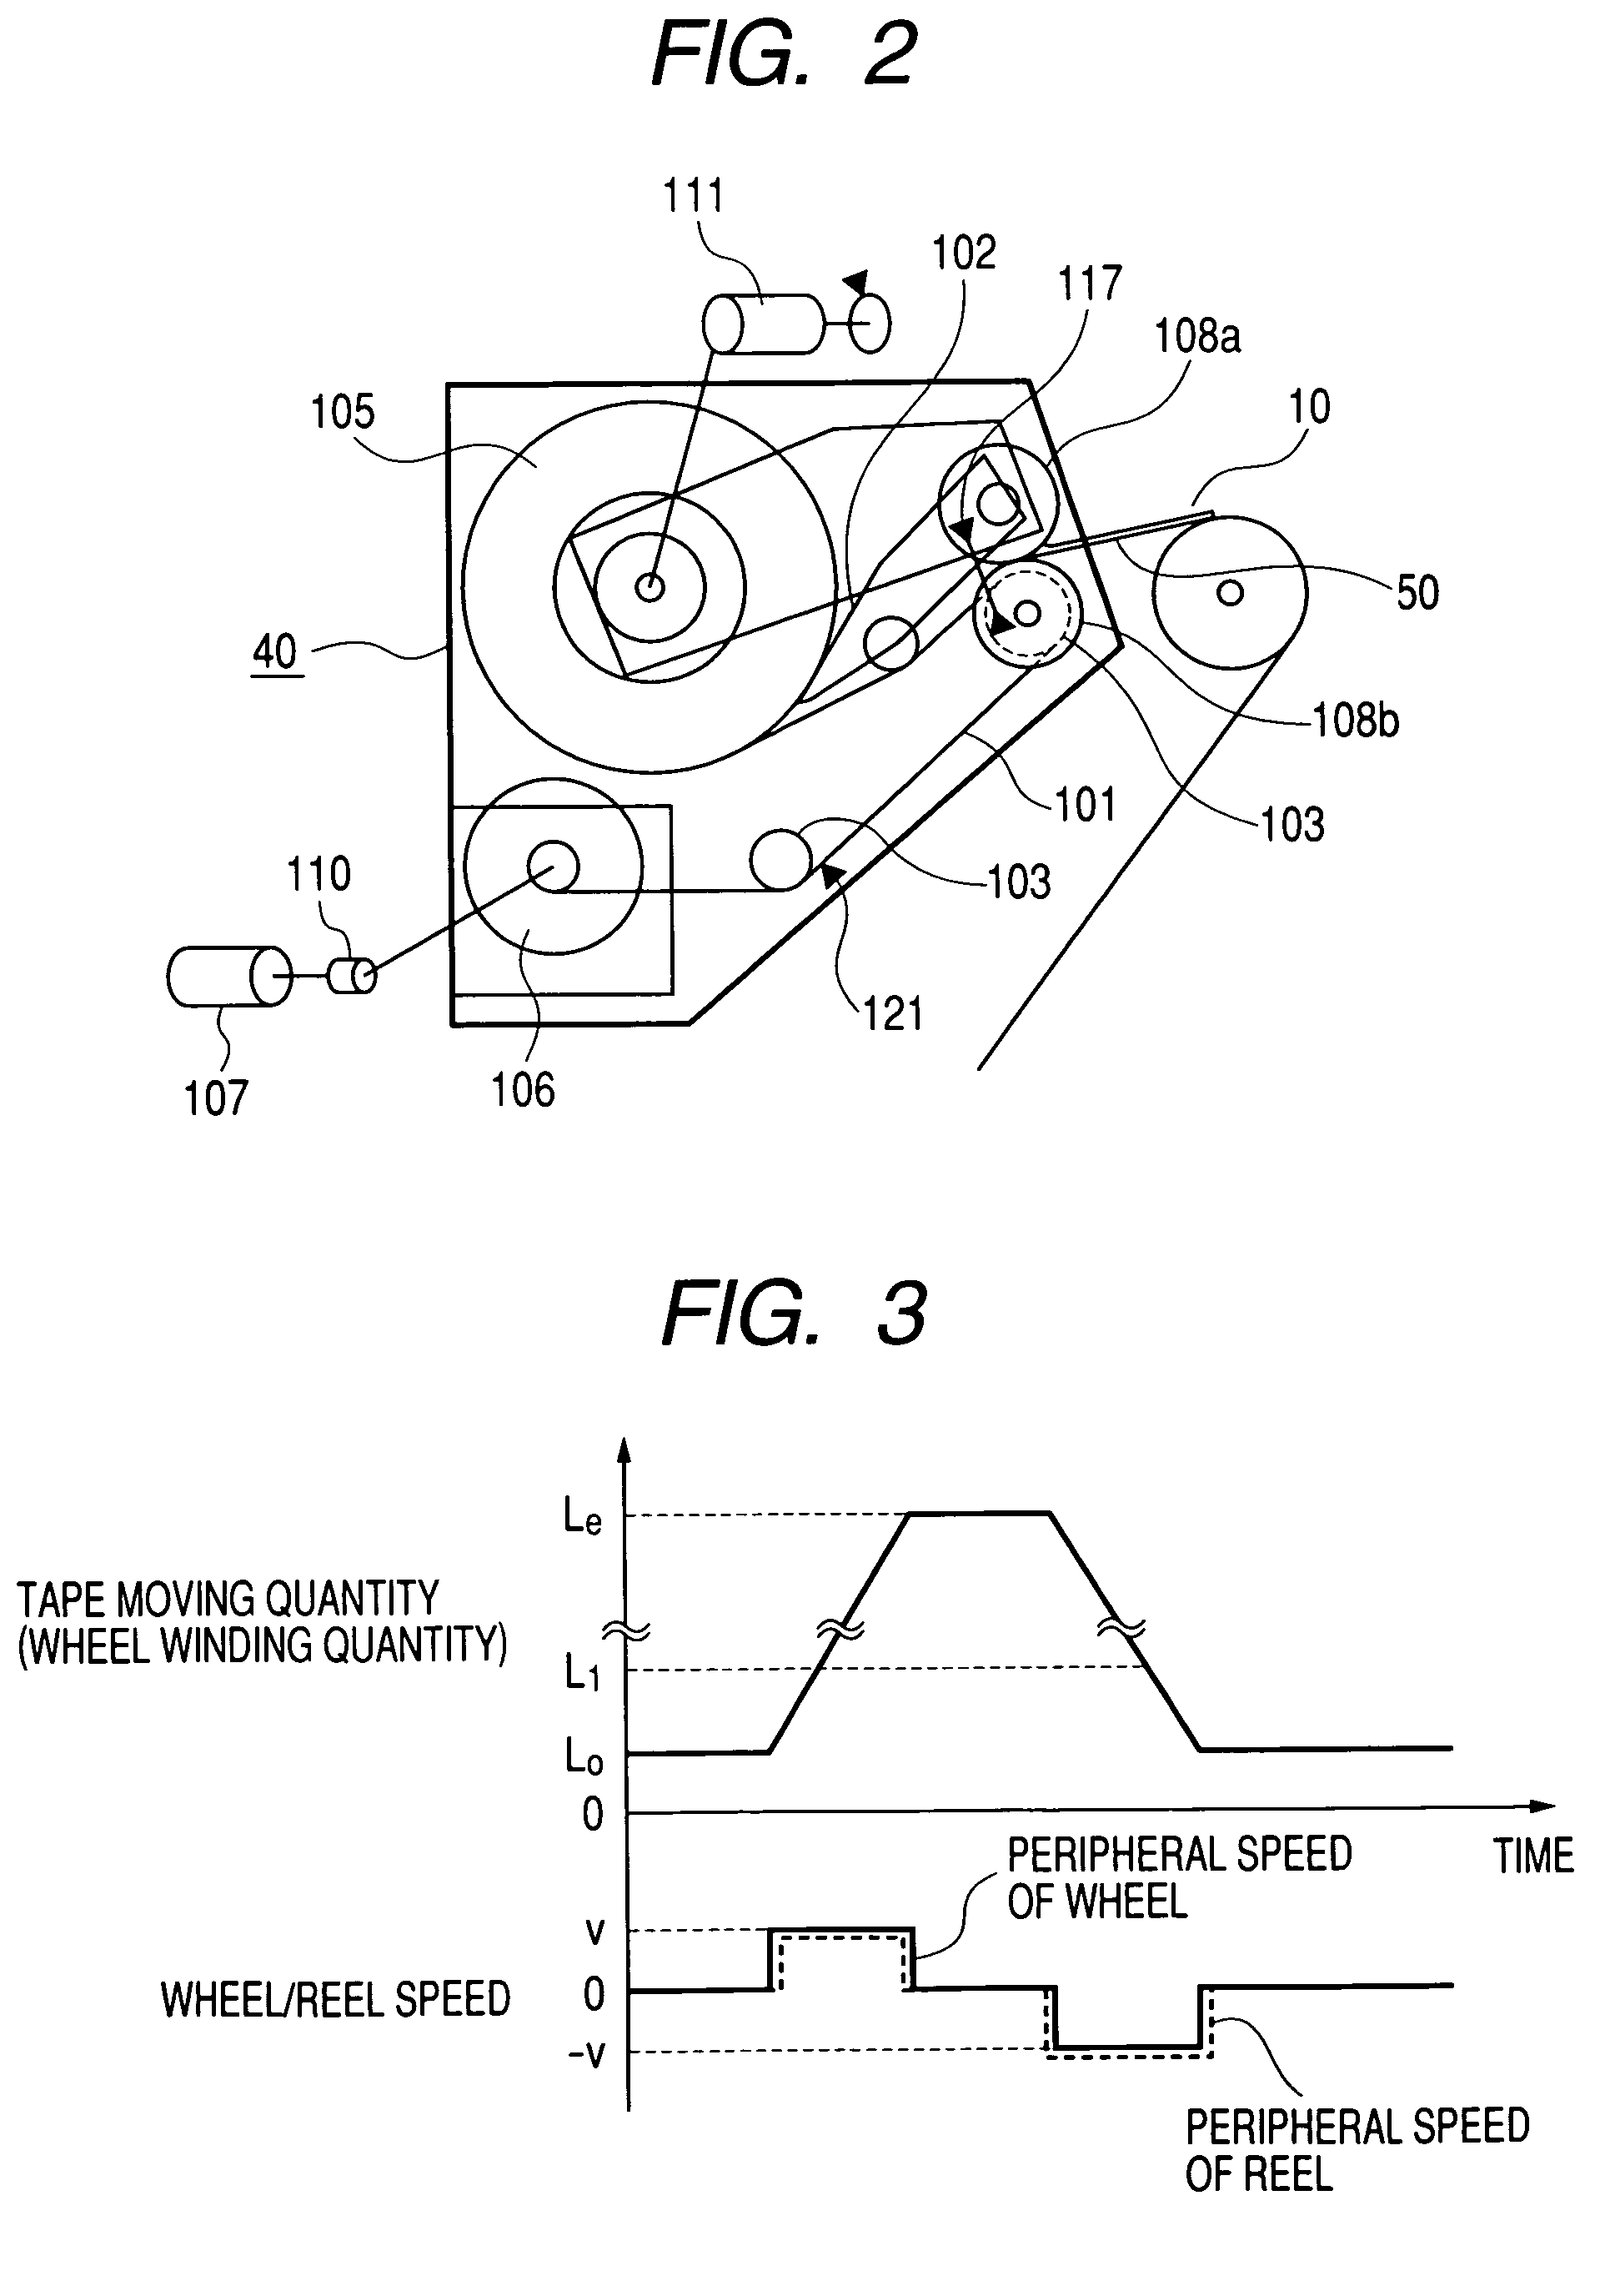 Paper sheet storing and releasing apparatus